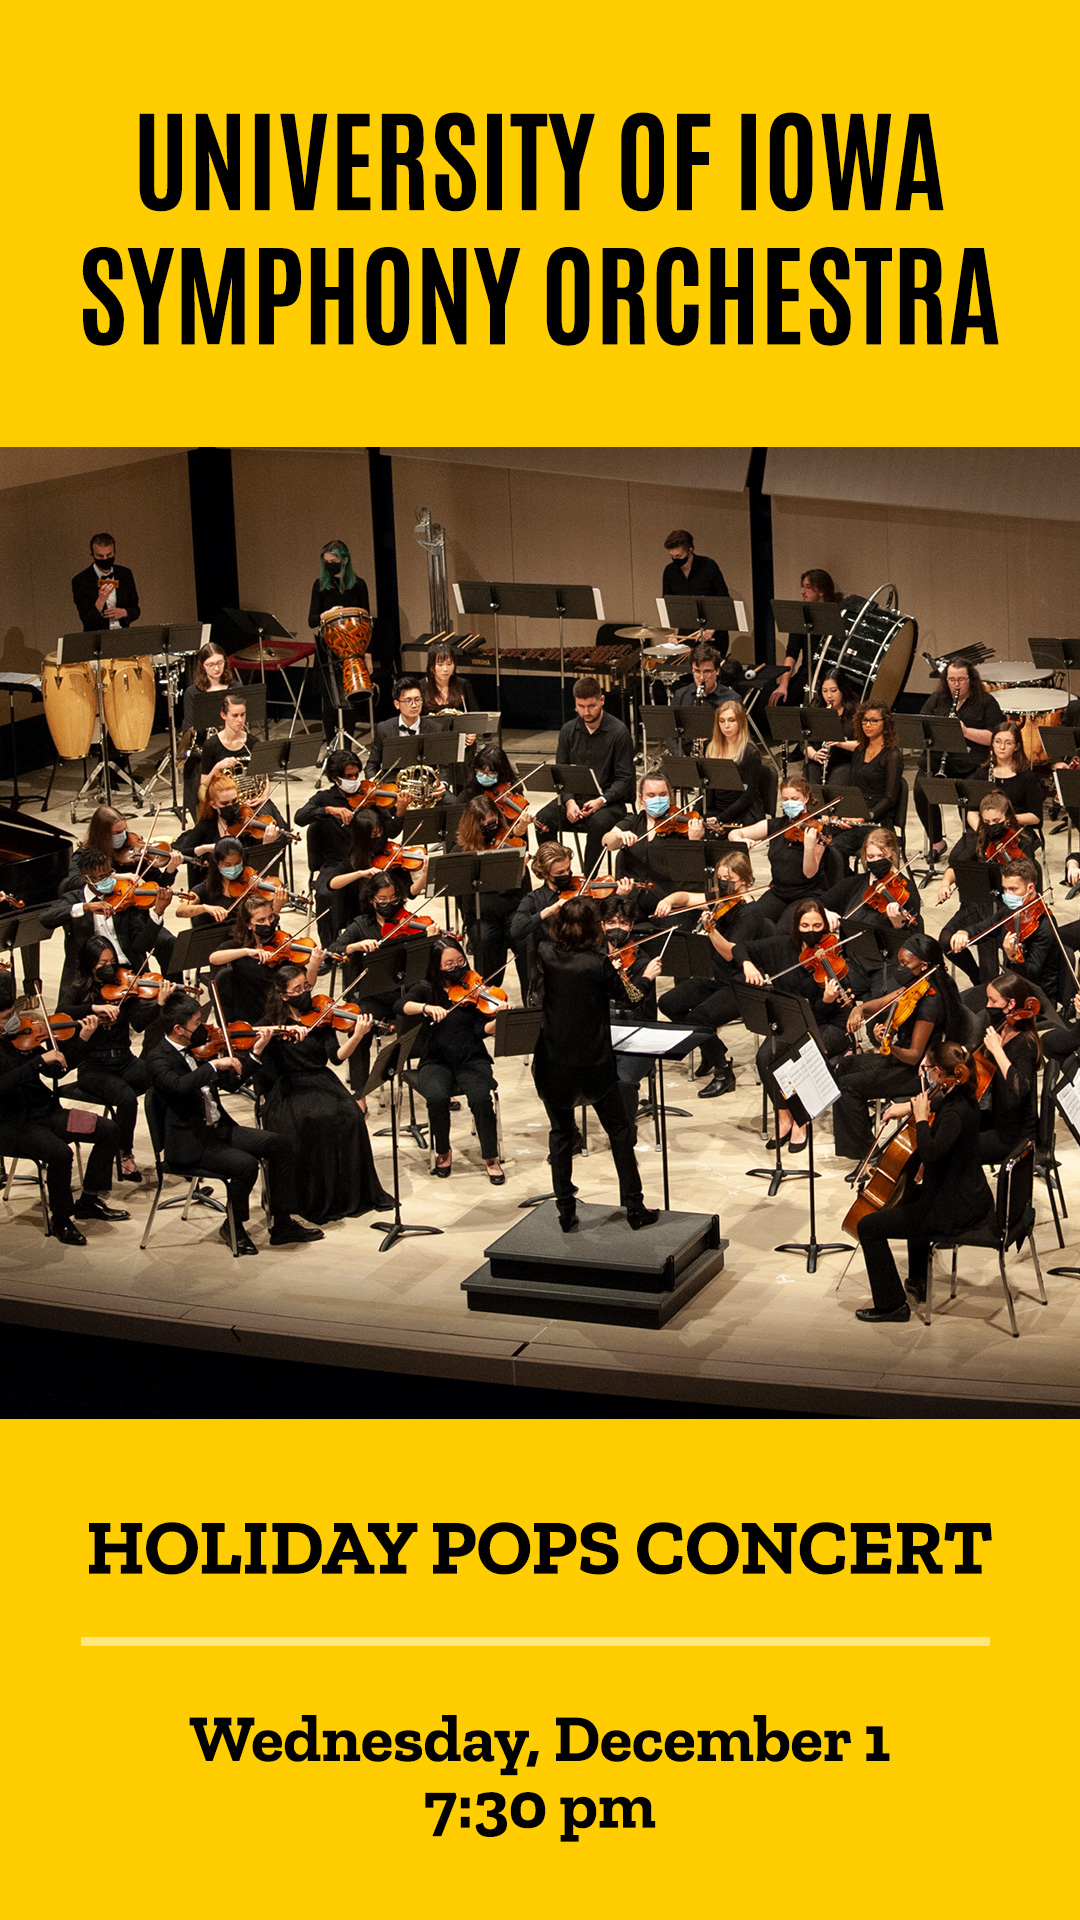 UI Symphony Orchestra Holiday Pops Concert